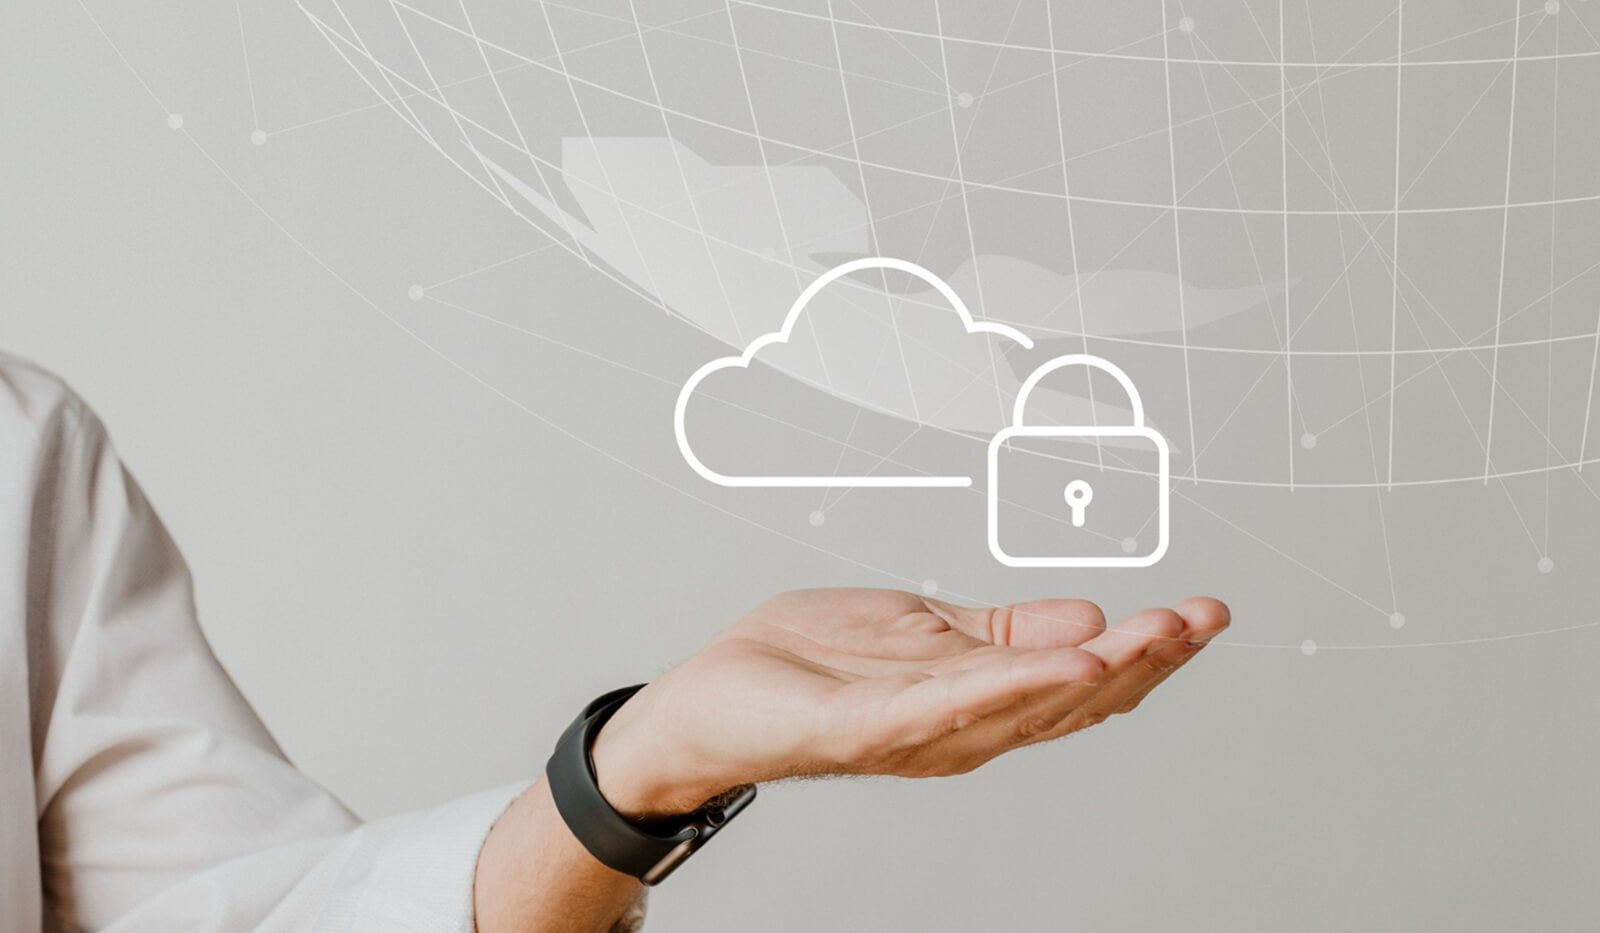 Data security and privacy in cloud computing